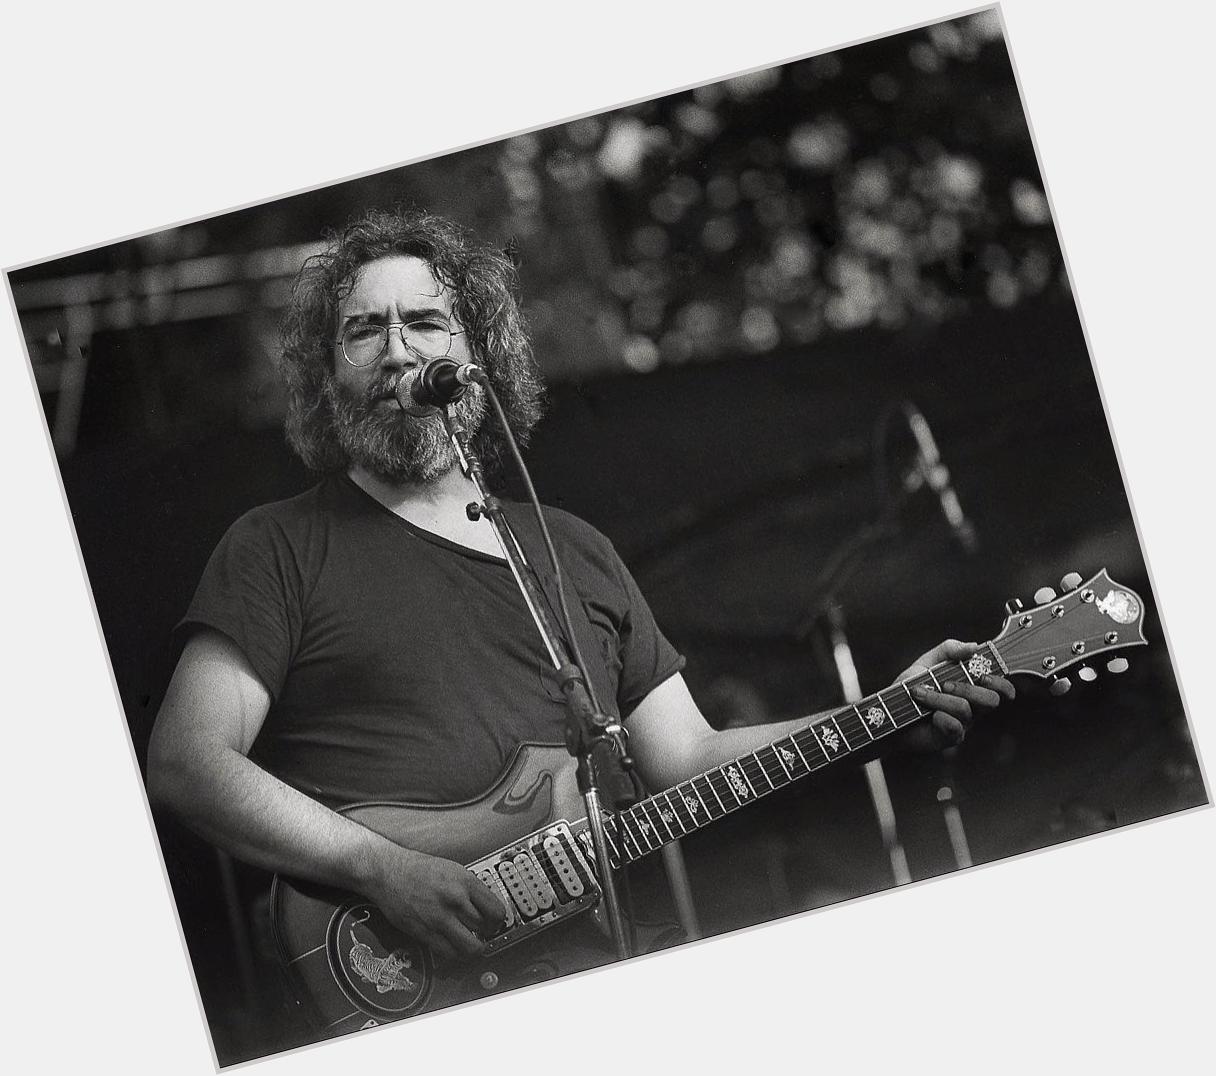 Wishing a very happy birthday to the one & only, Jerry Garcia 